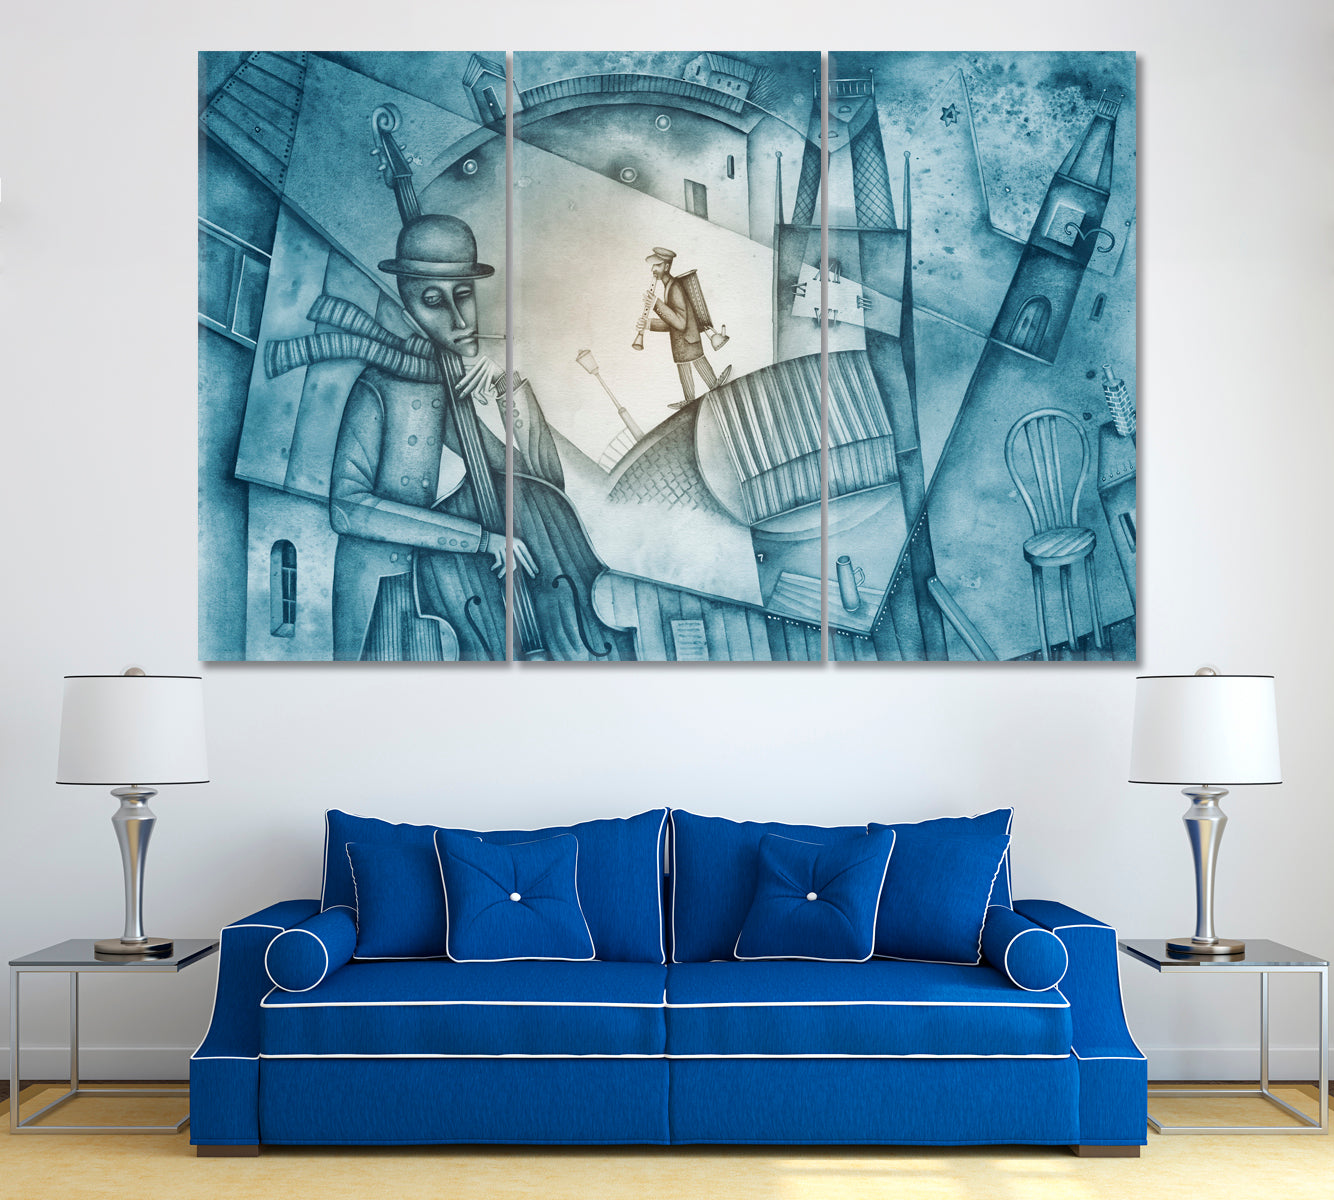 Jazz Band Playing at Street. Cubism Style Canvas Print ArtLexy 3 Panels 36"x24" inches 